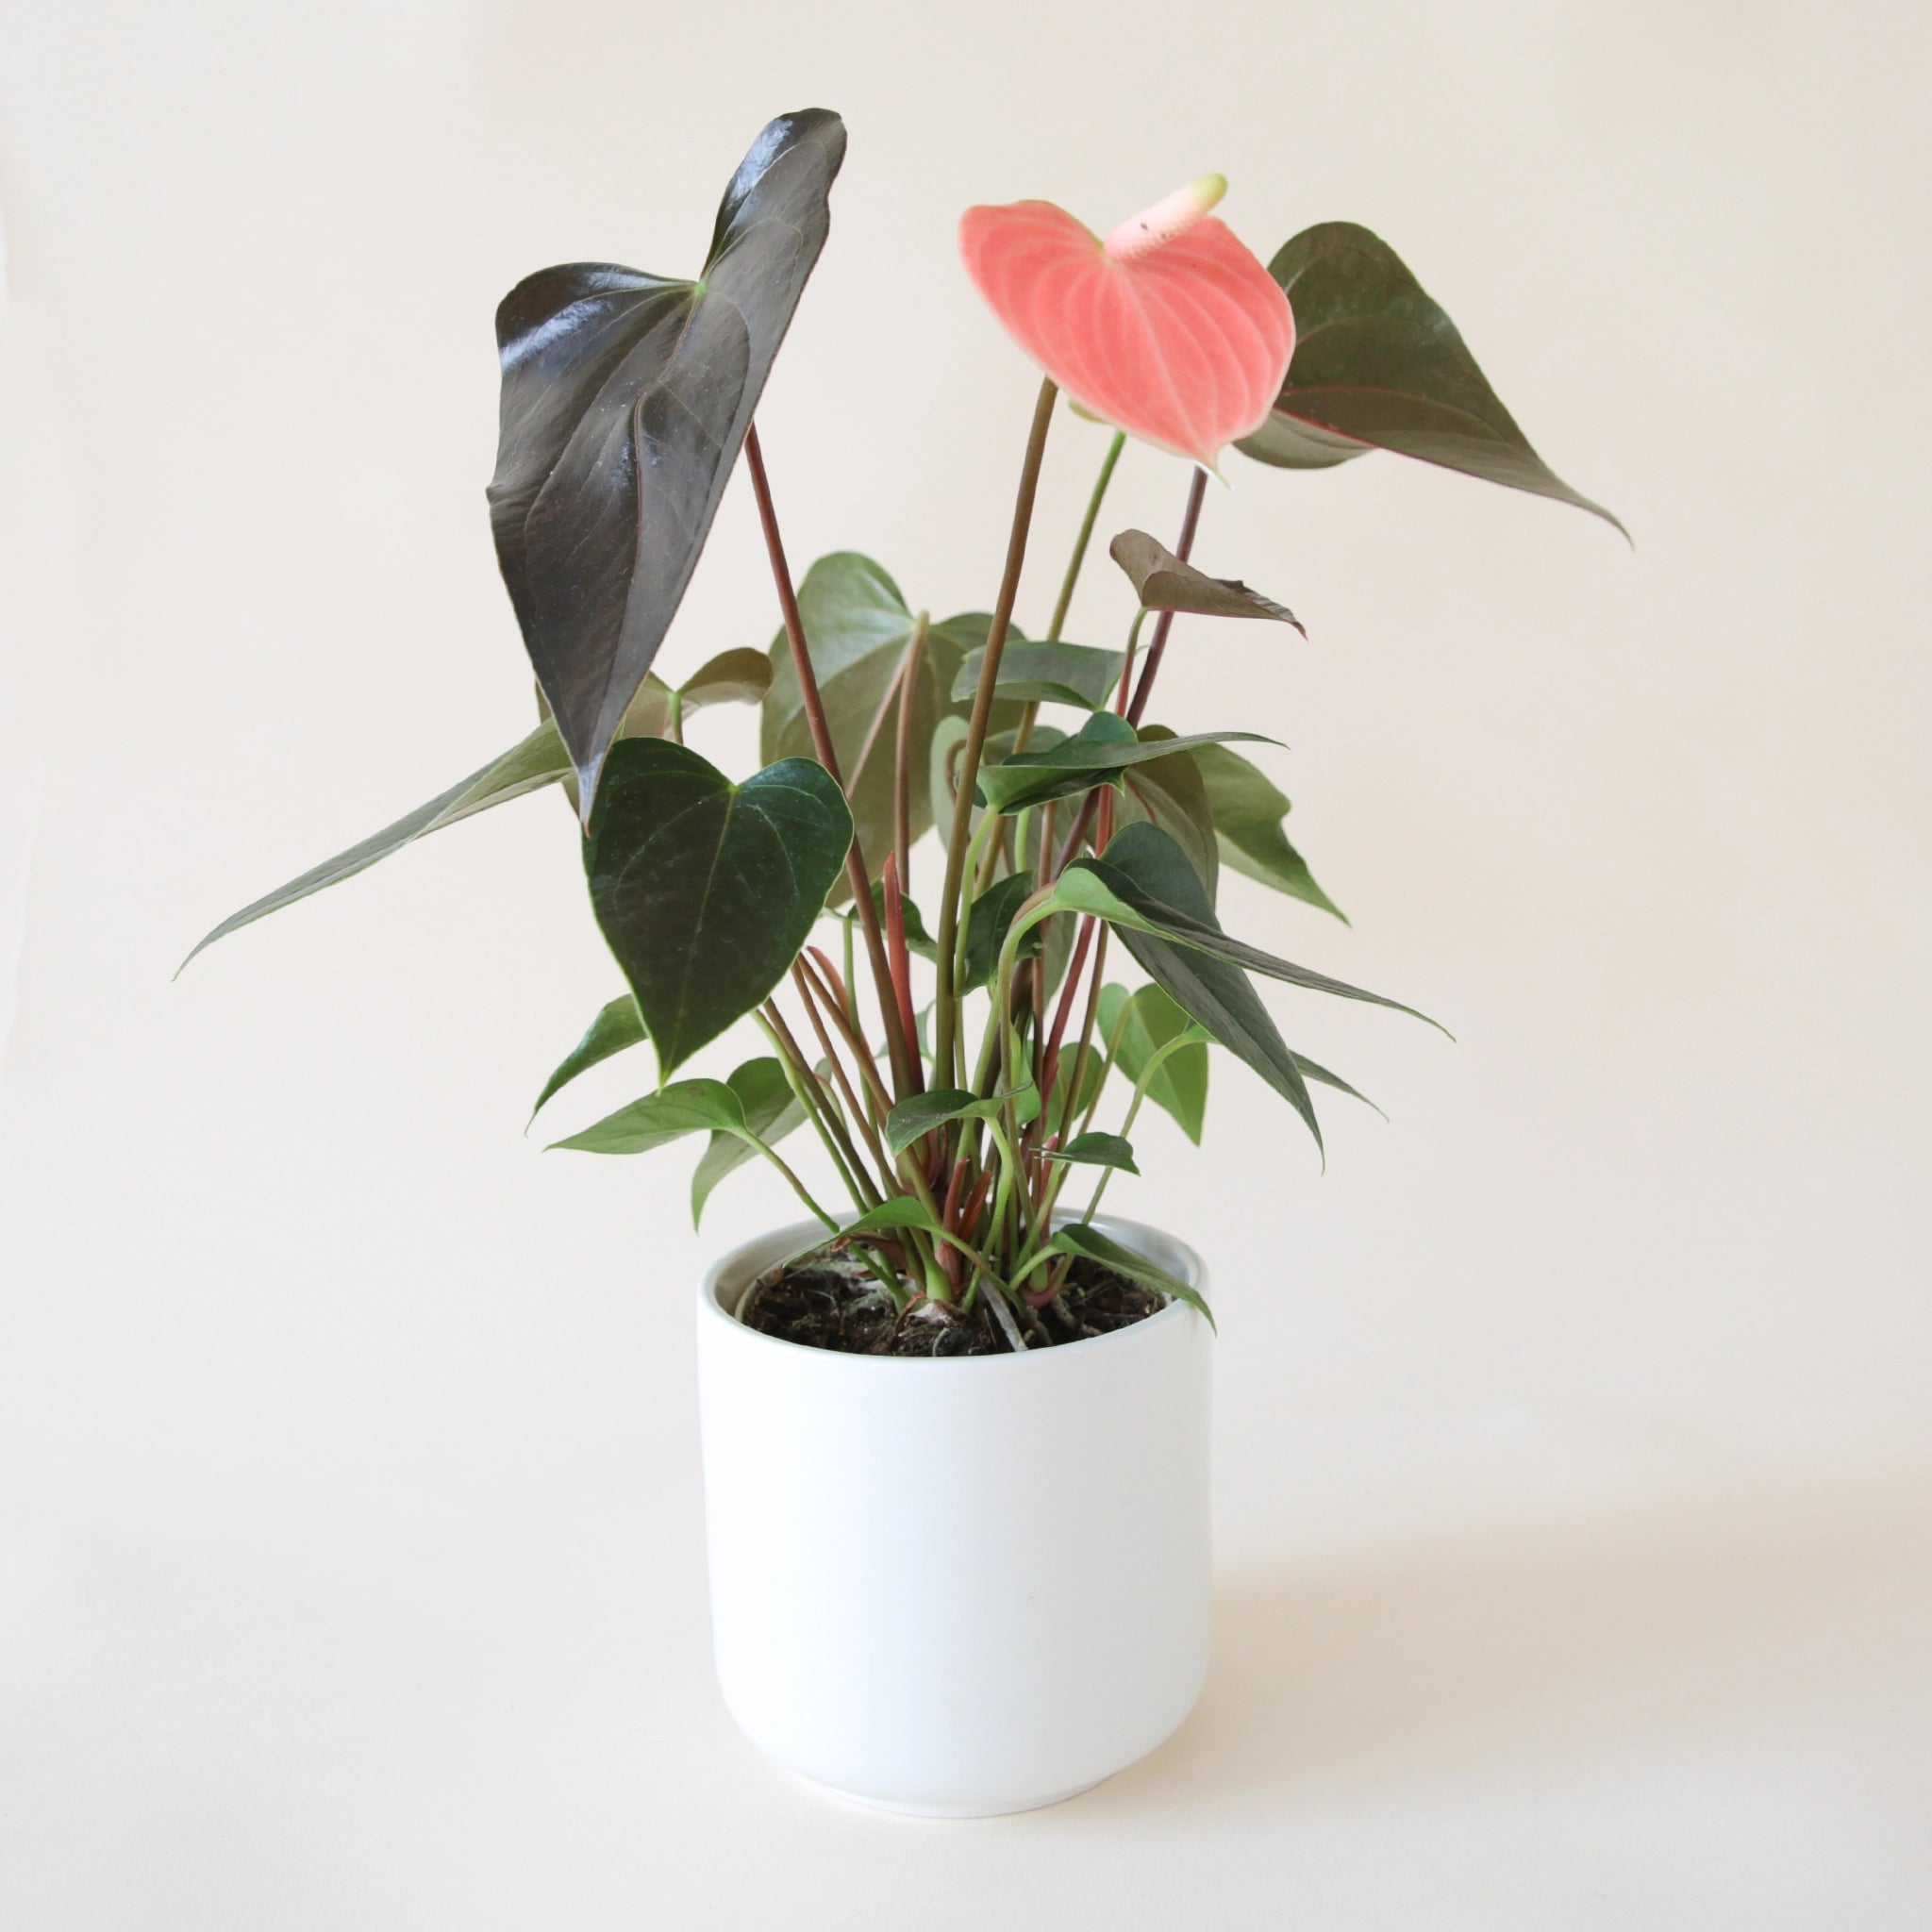 an anthurium rainbow champion with dark green pointed leaves and a salmon pink flower in a white pot